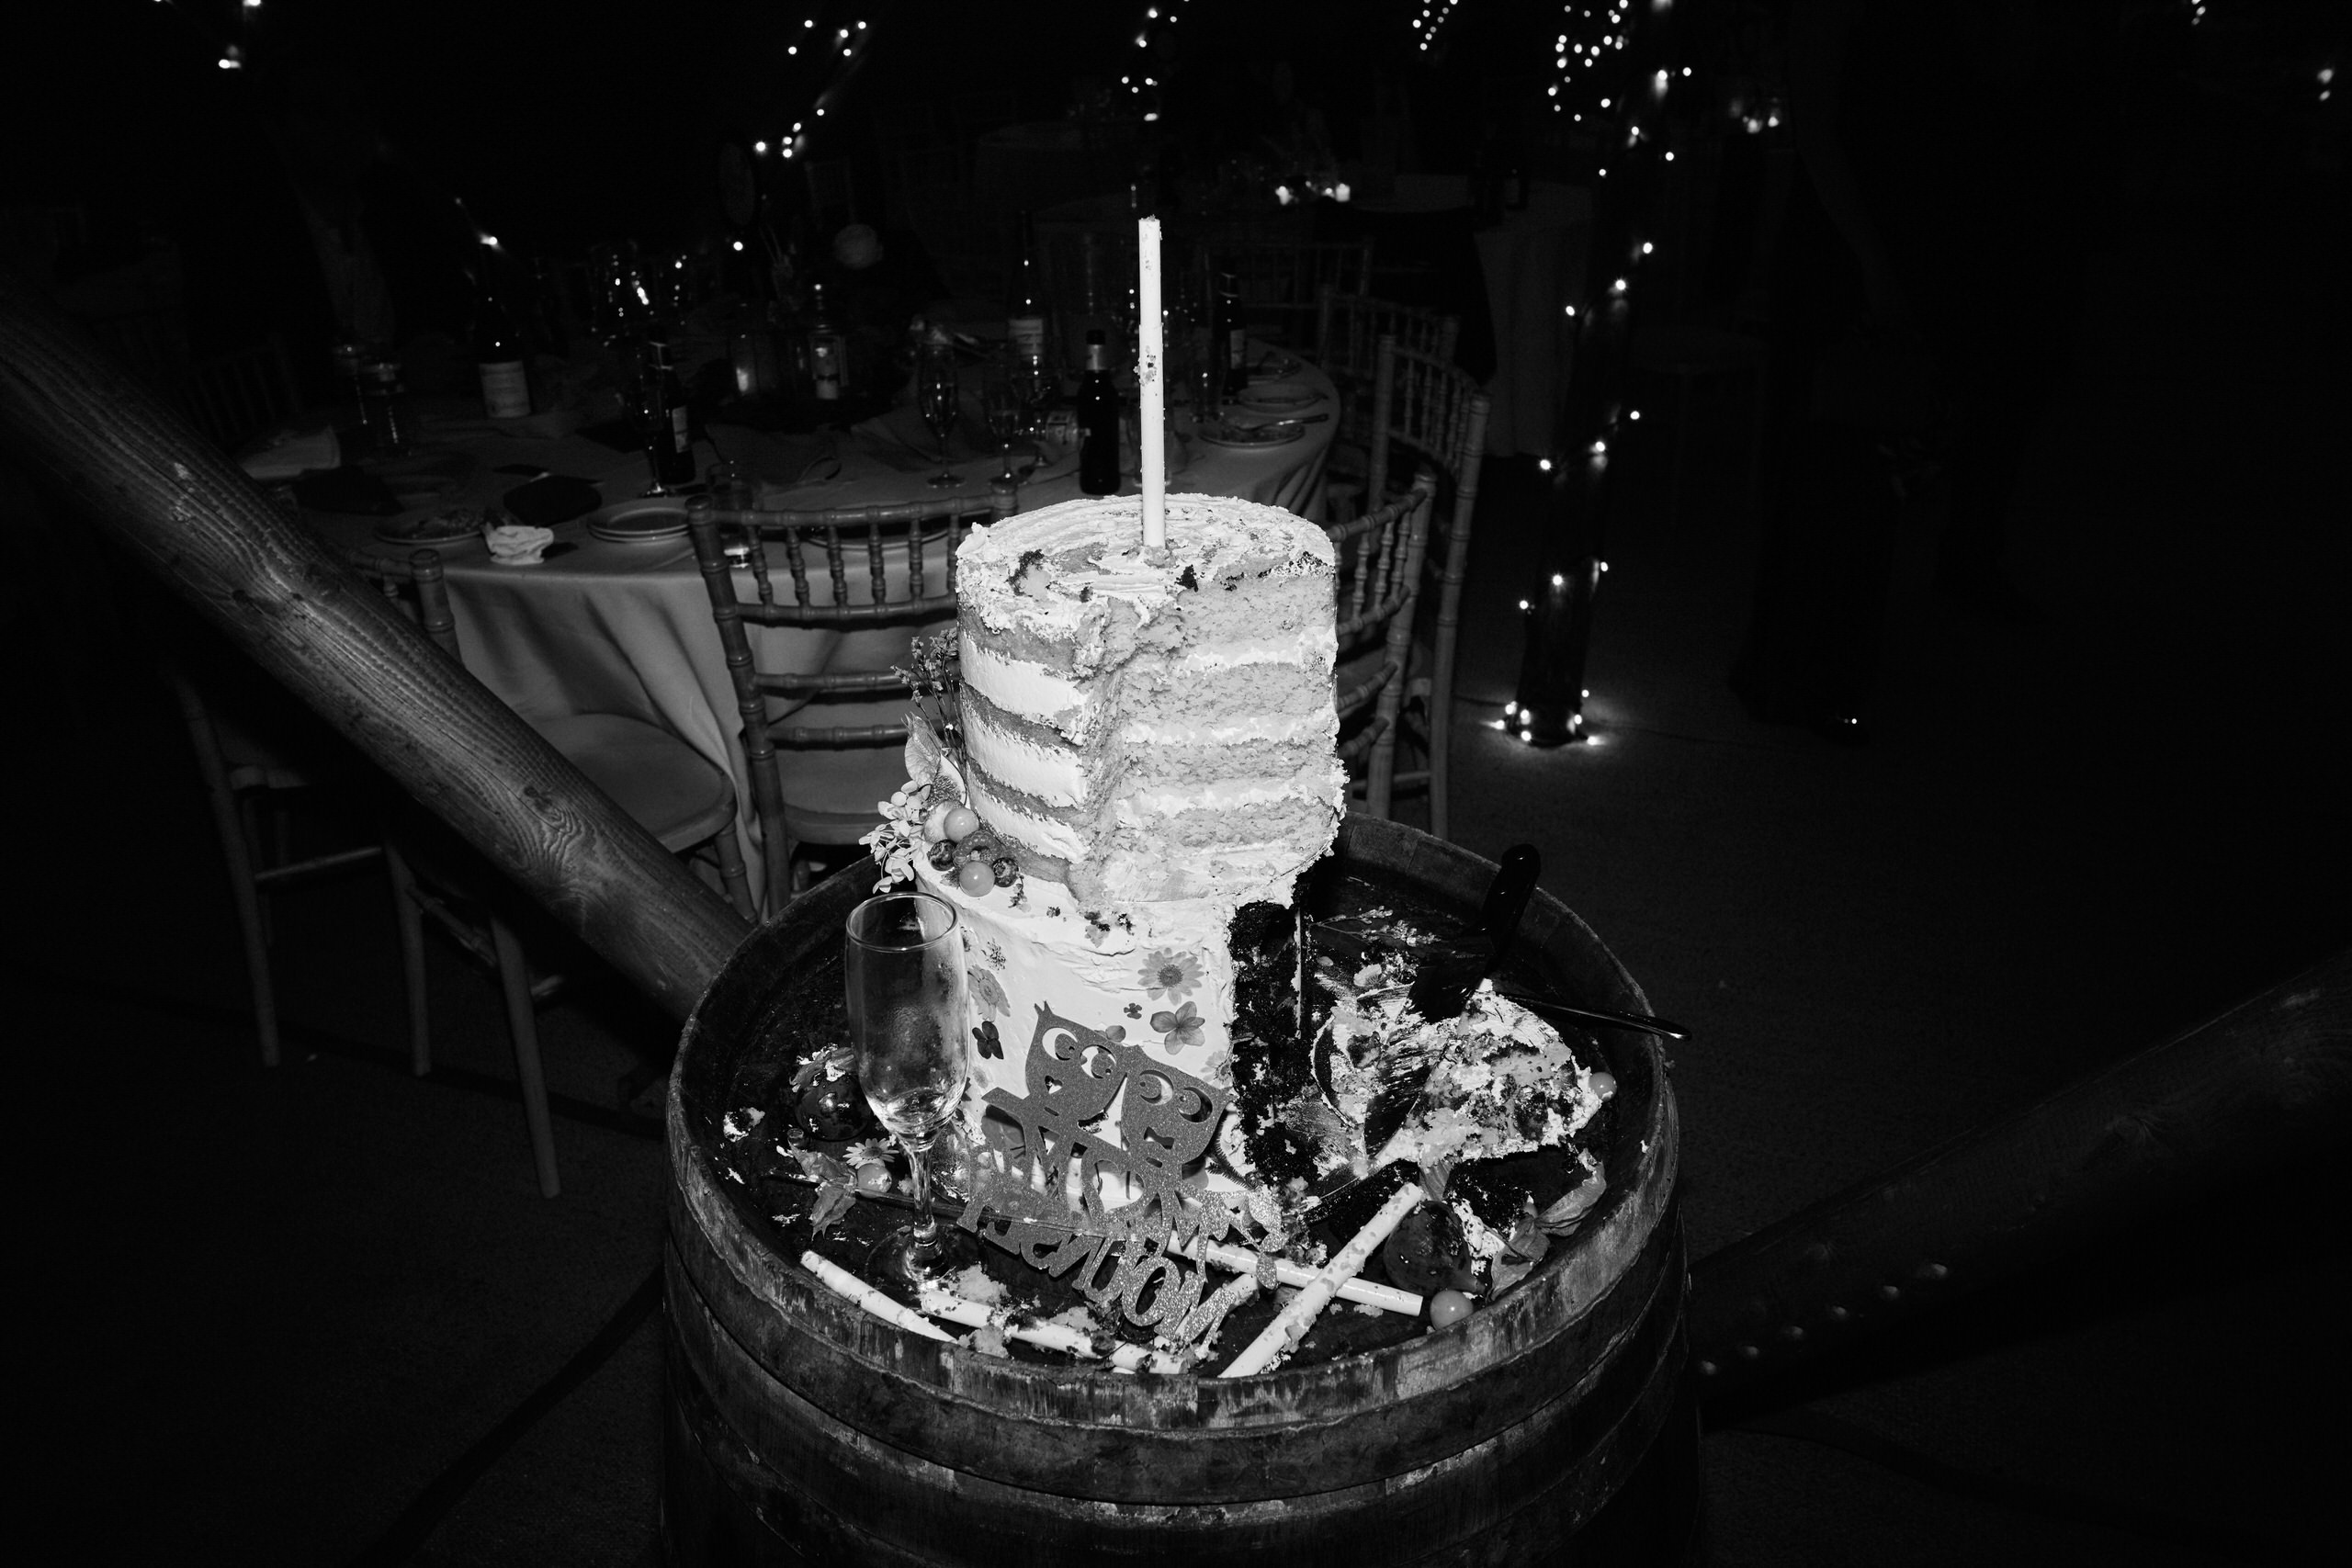 A wedding cake is placed on a barrel.